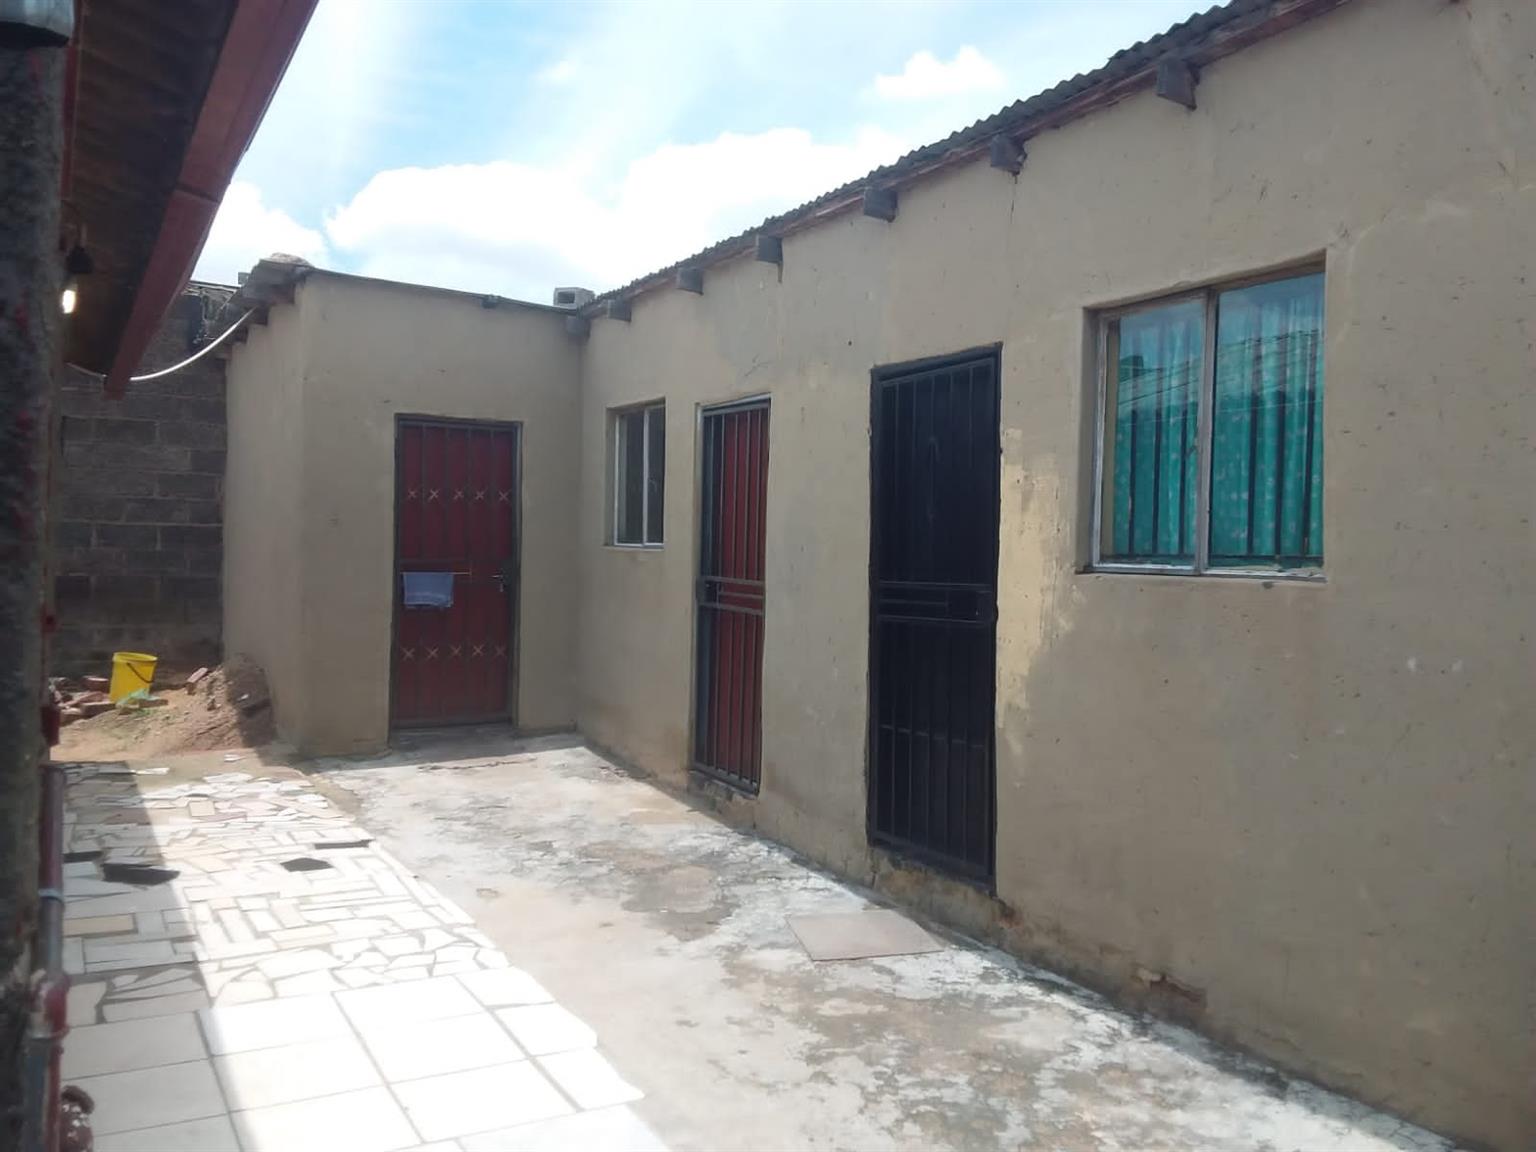 4rrom house for sale in tembisa